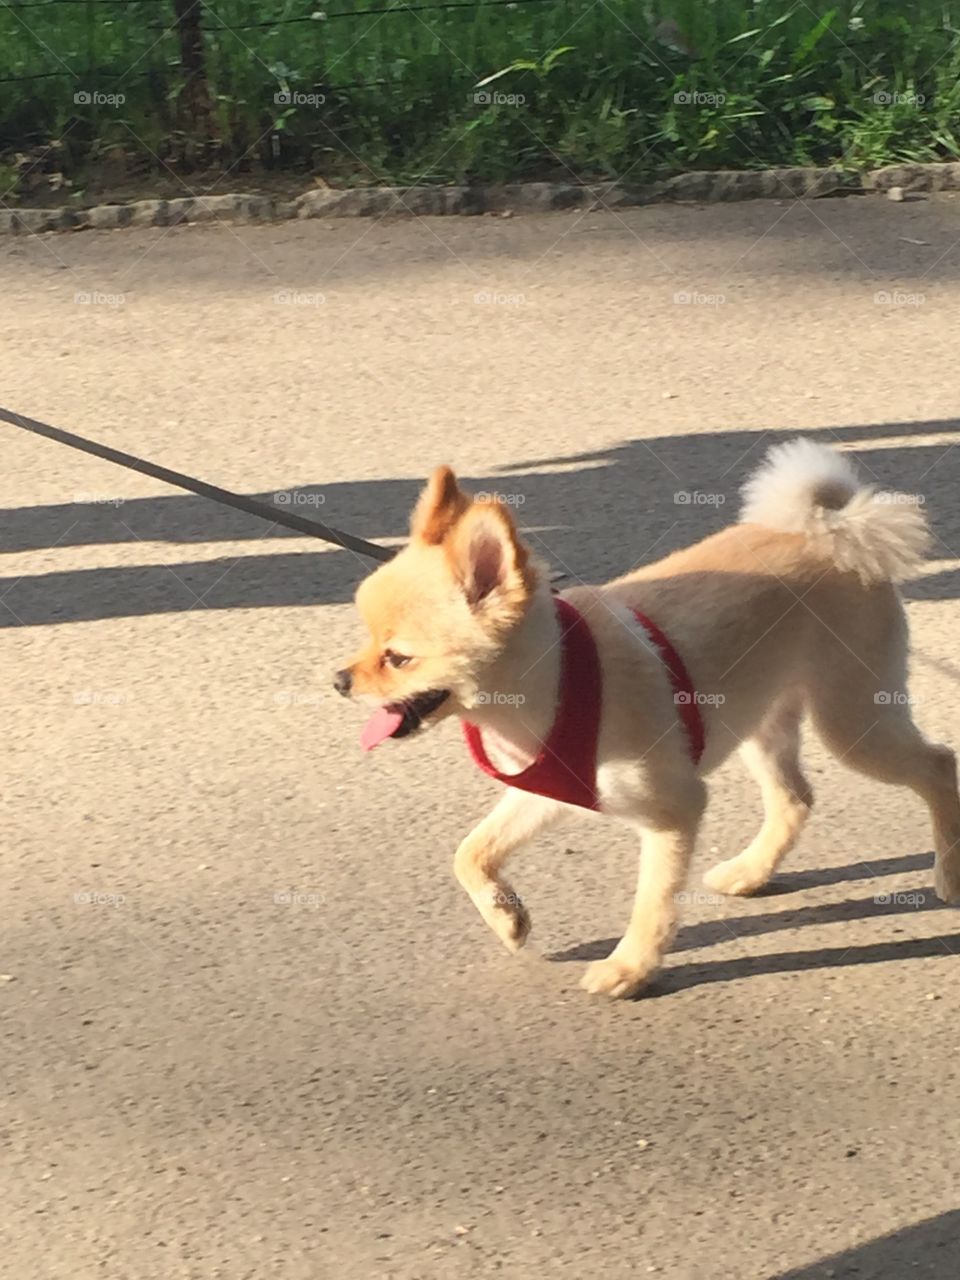 A Walk In The Park. A small dog being walked